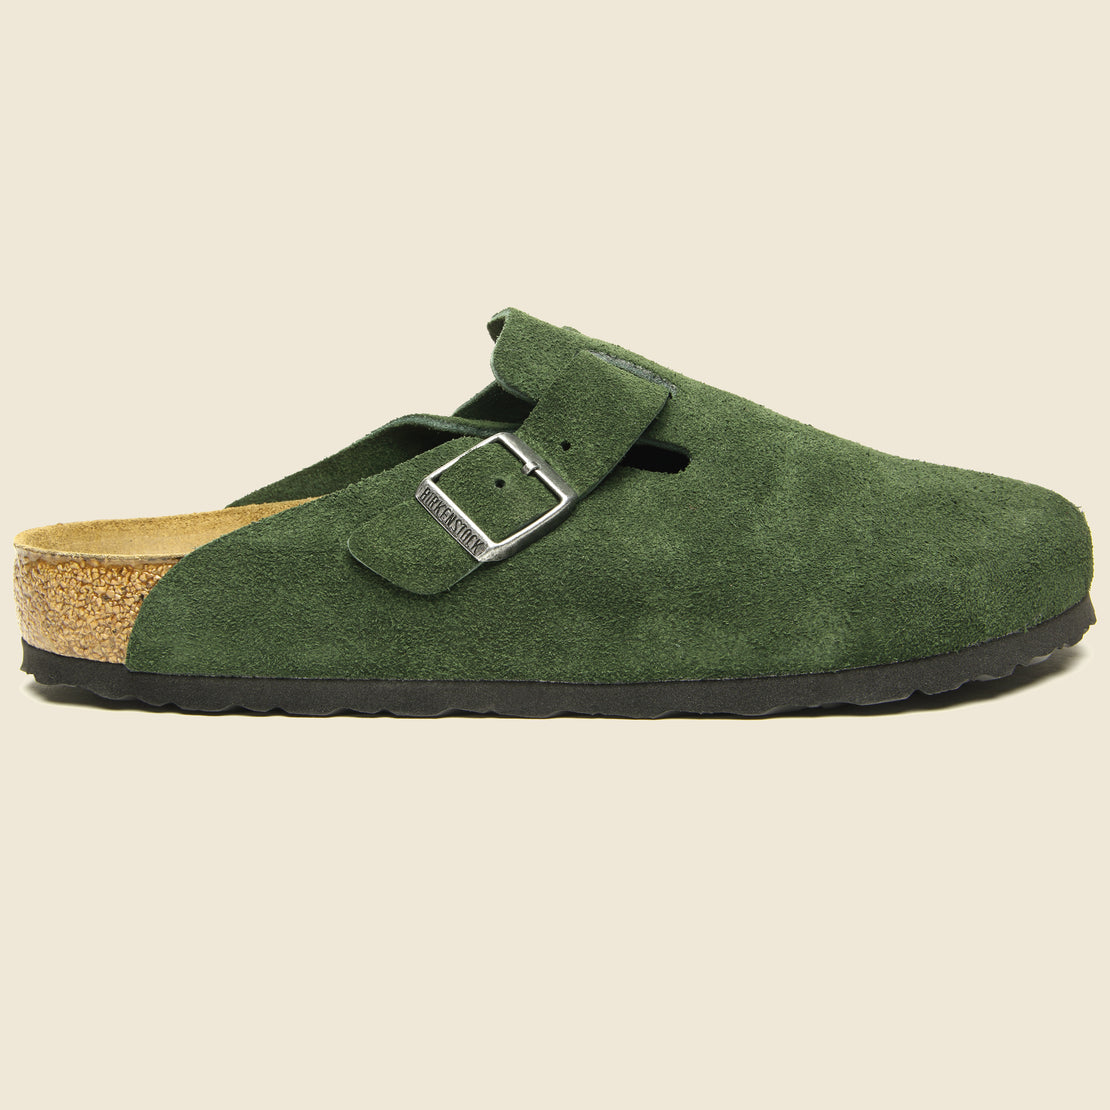 Birkenstock Boston Soft Footbed Clog - Mountain View/Suede